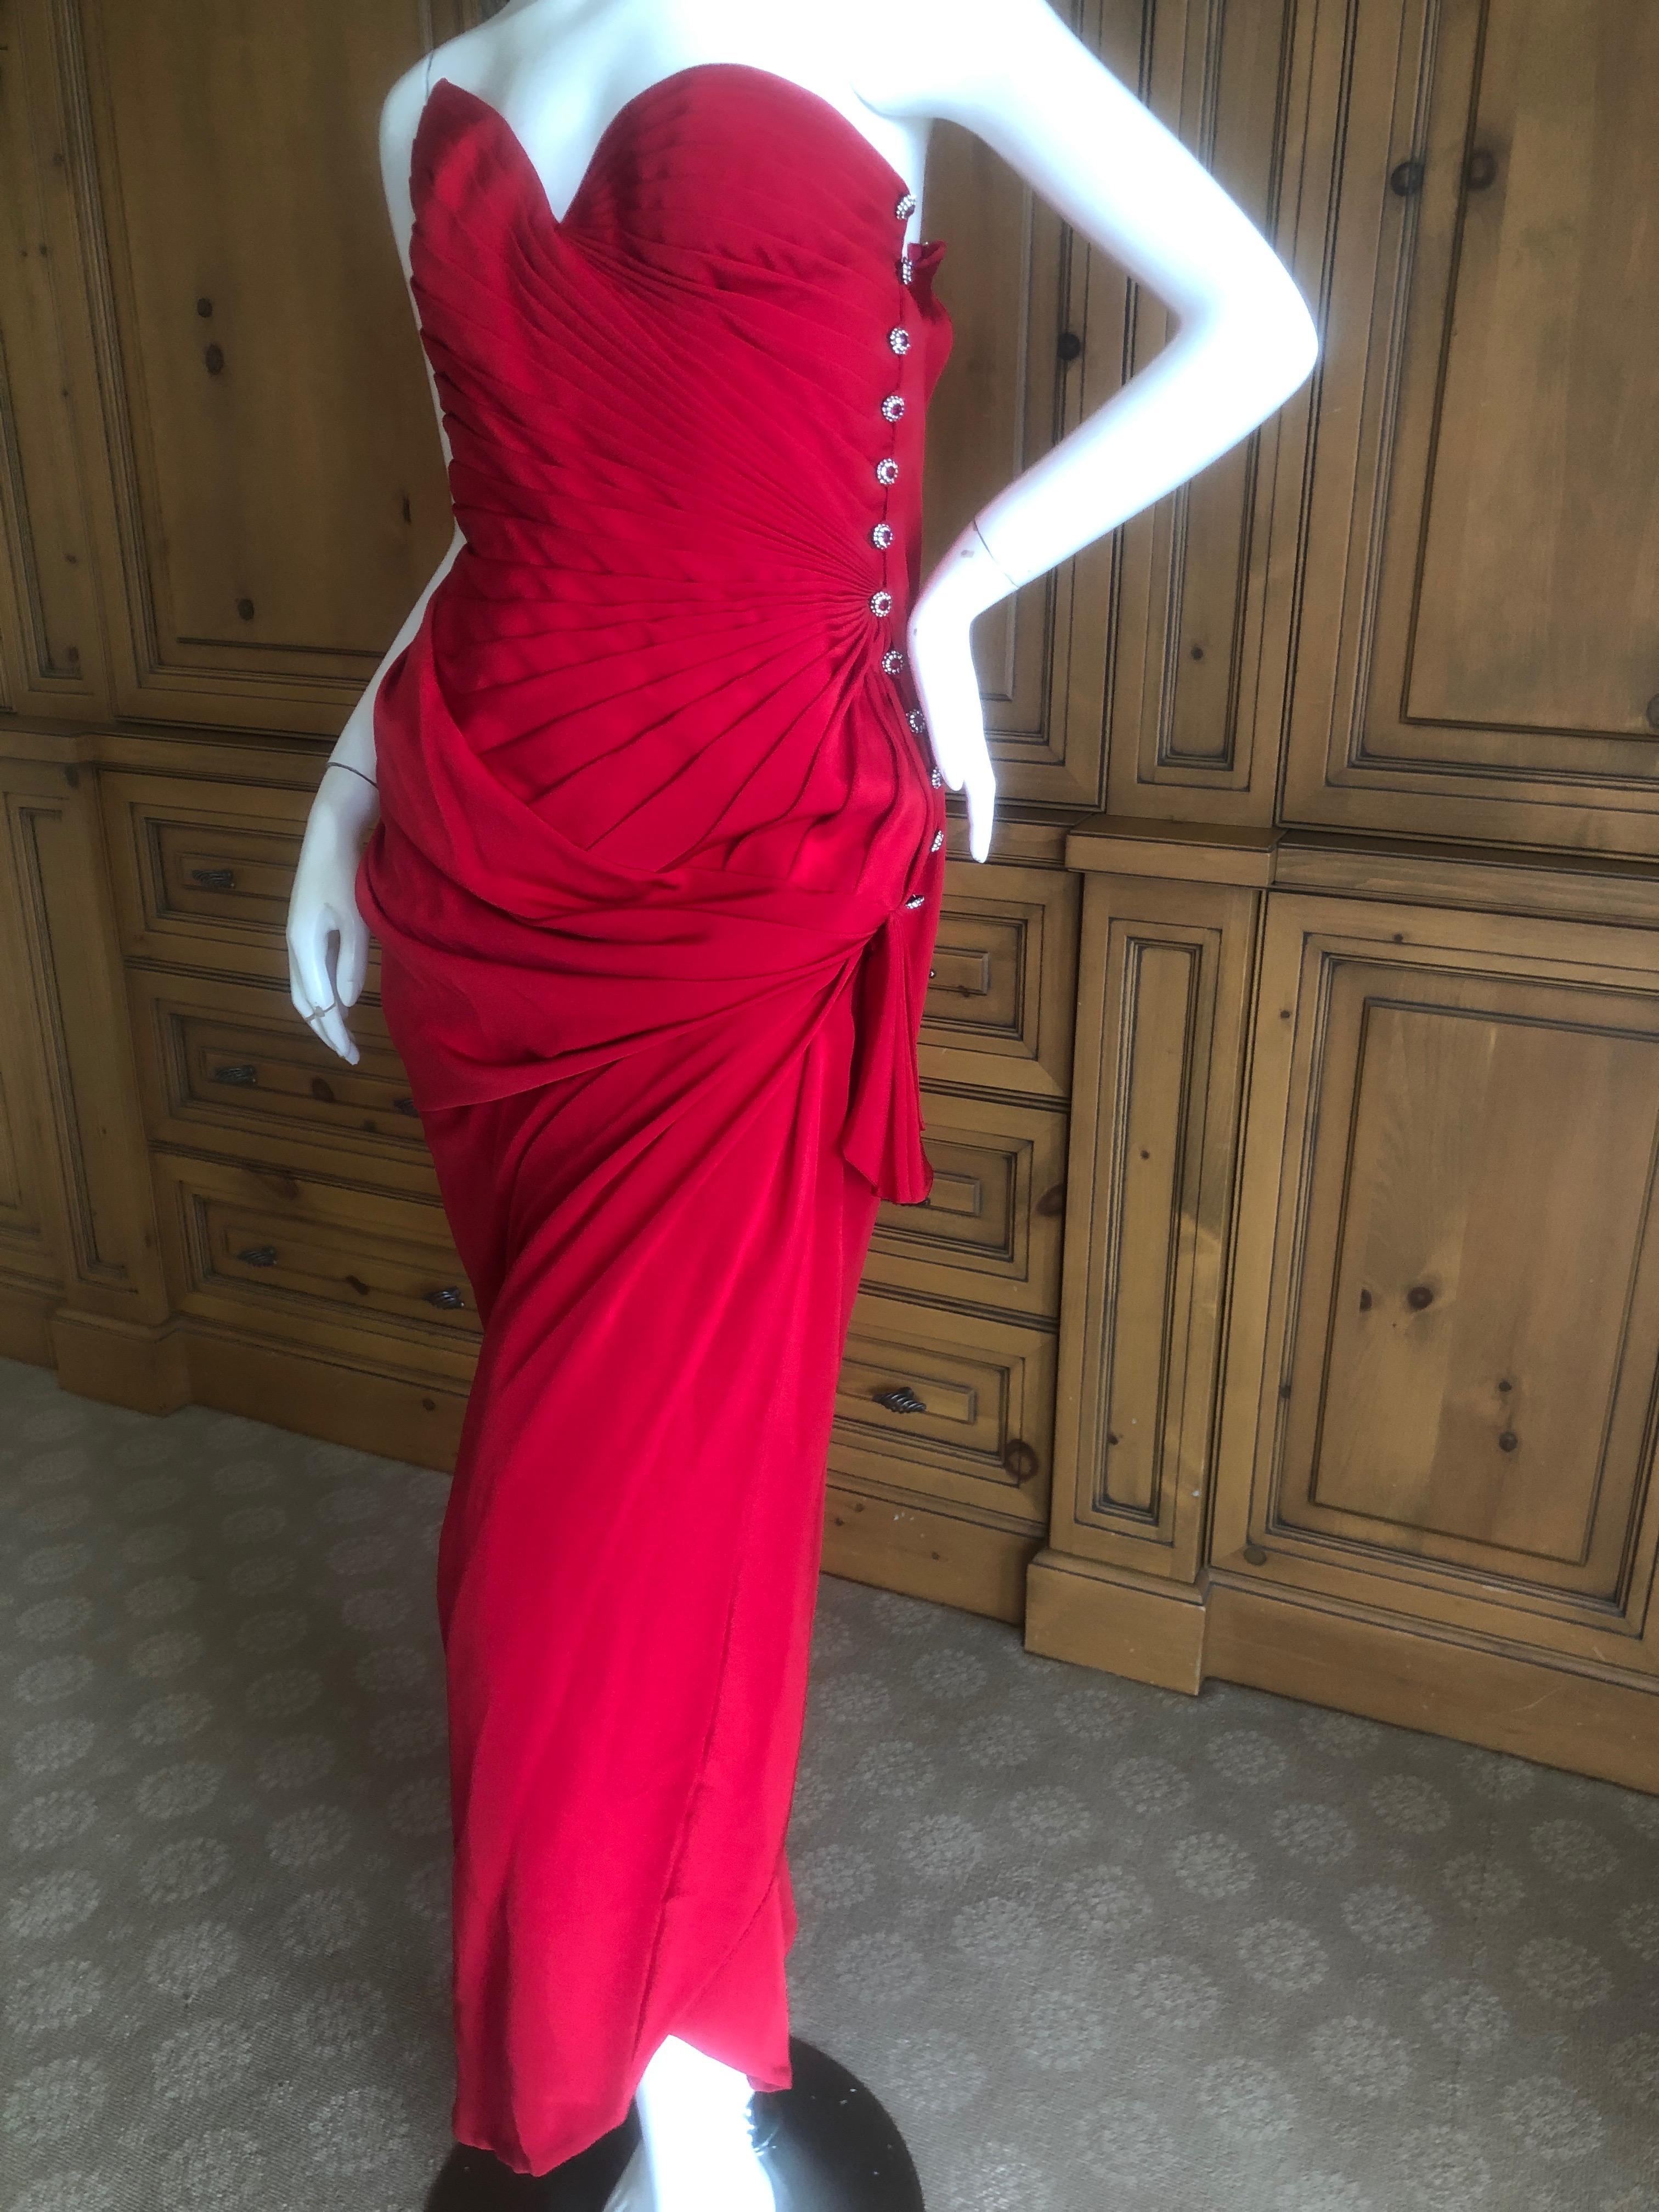 Women's Emanuel Ungaro Numbered Haute Couture Fall 1984 Red  Strapless Evening Dress For Sale